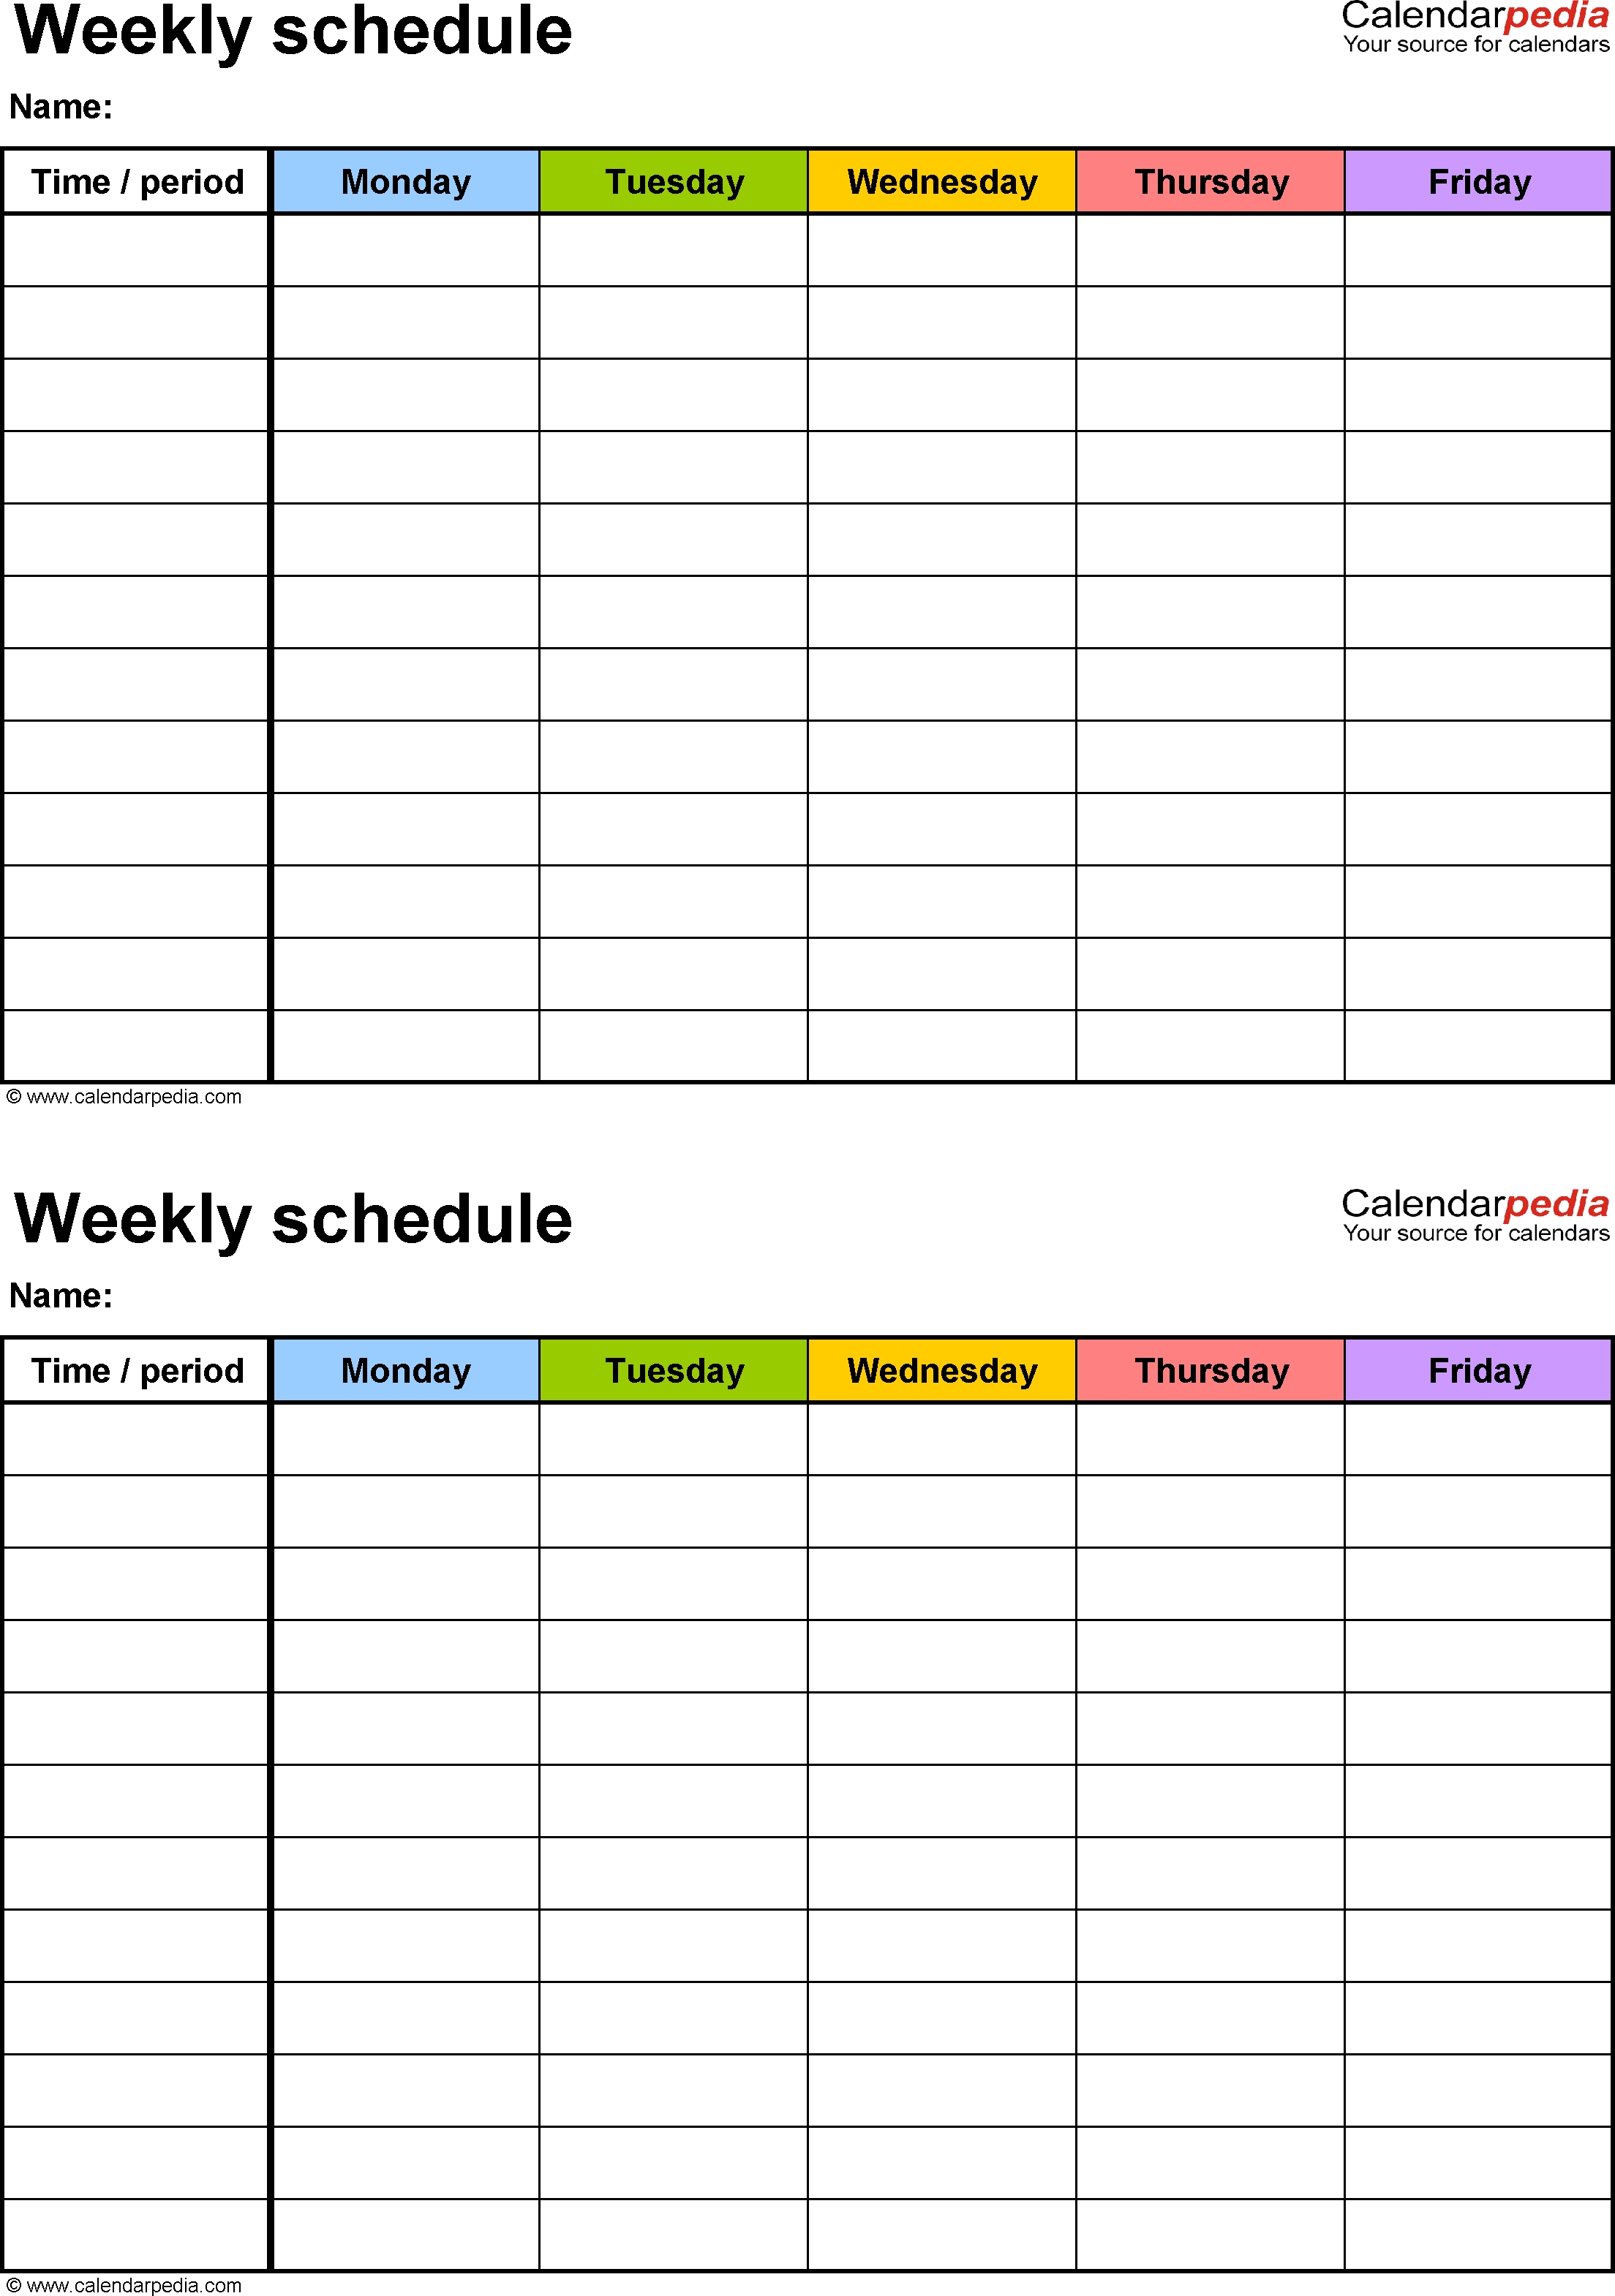 Free Weekly Schedule Templates For Word - 18 Templates-Template Monday To Friday